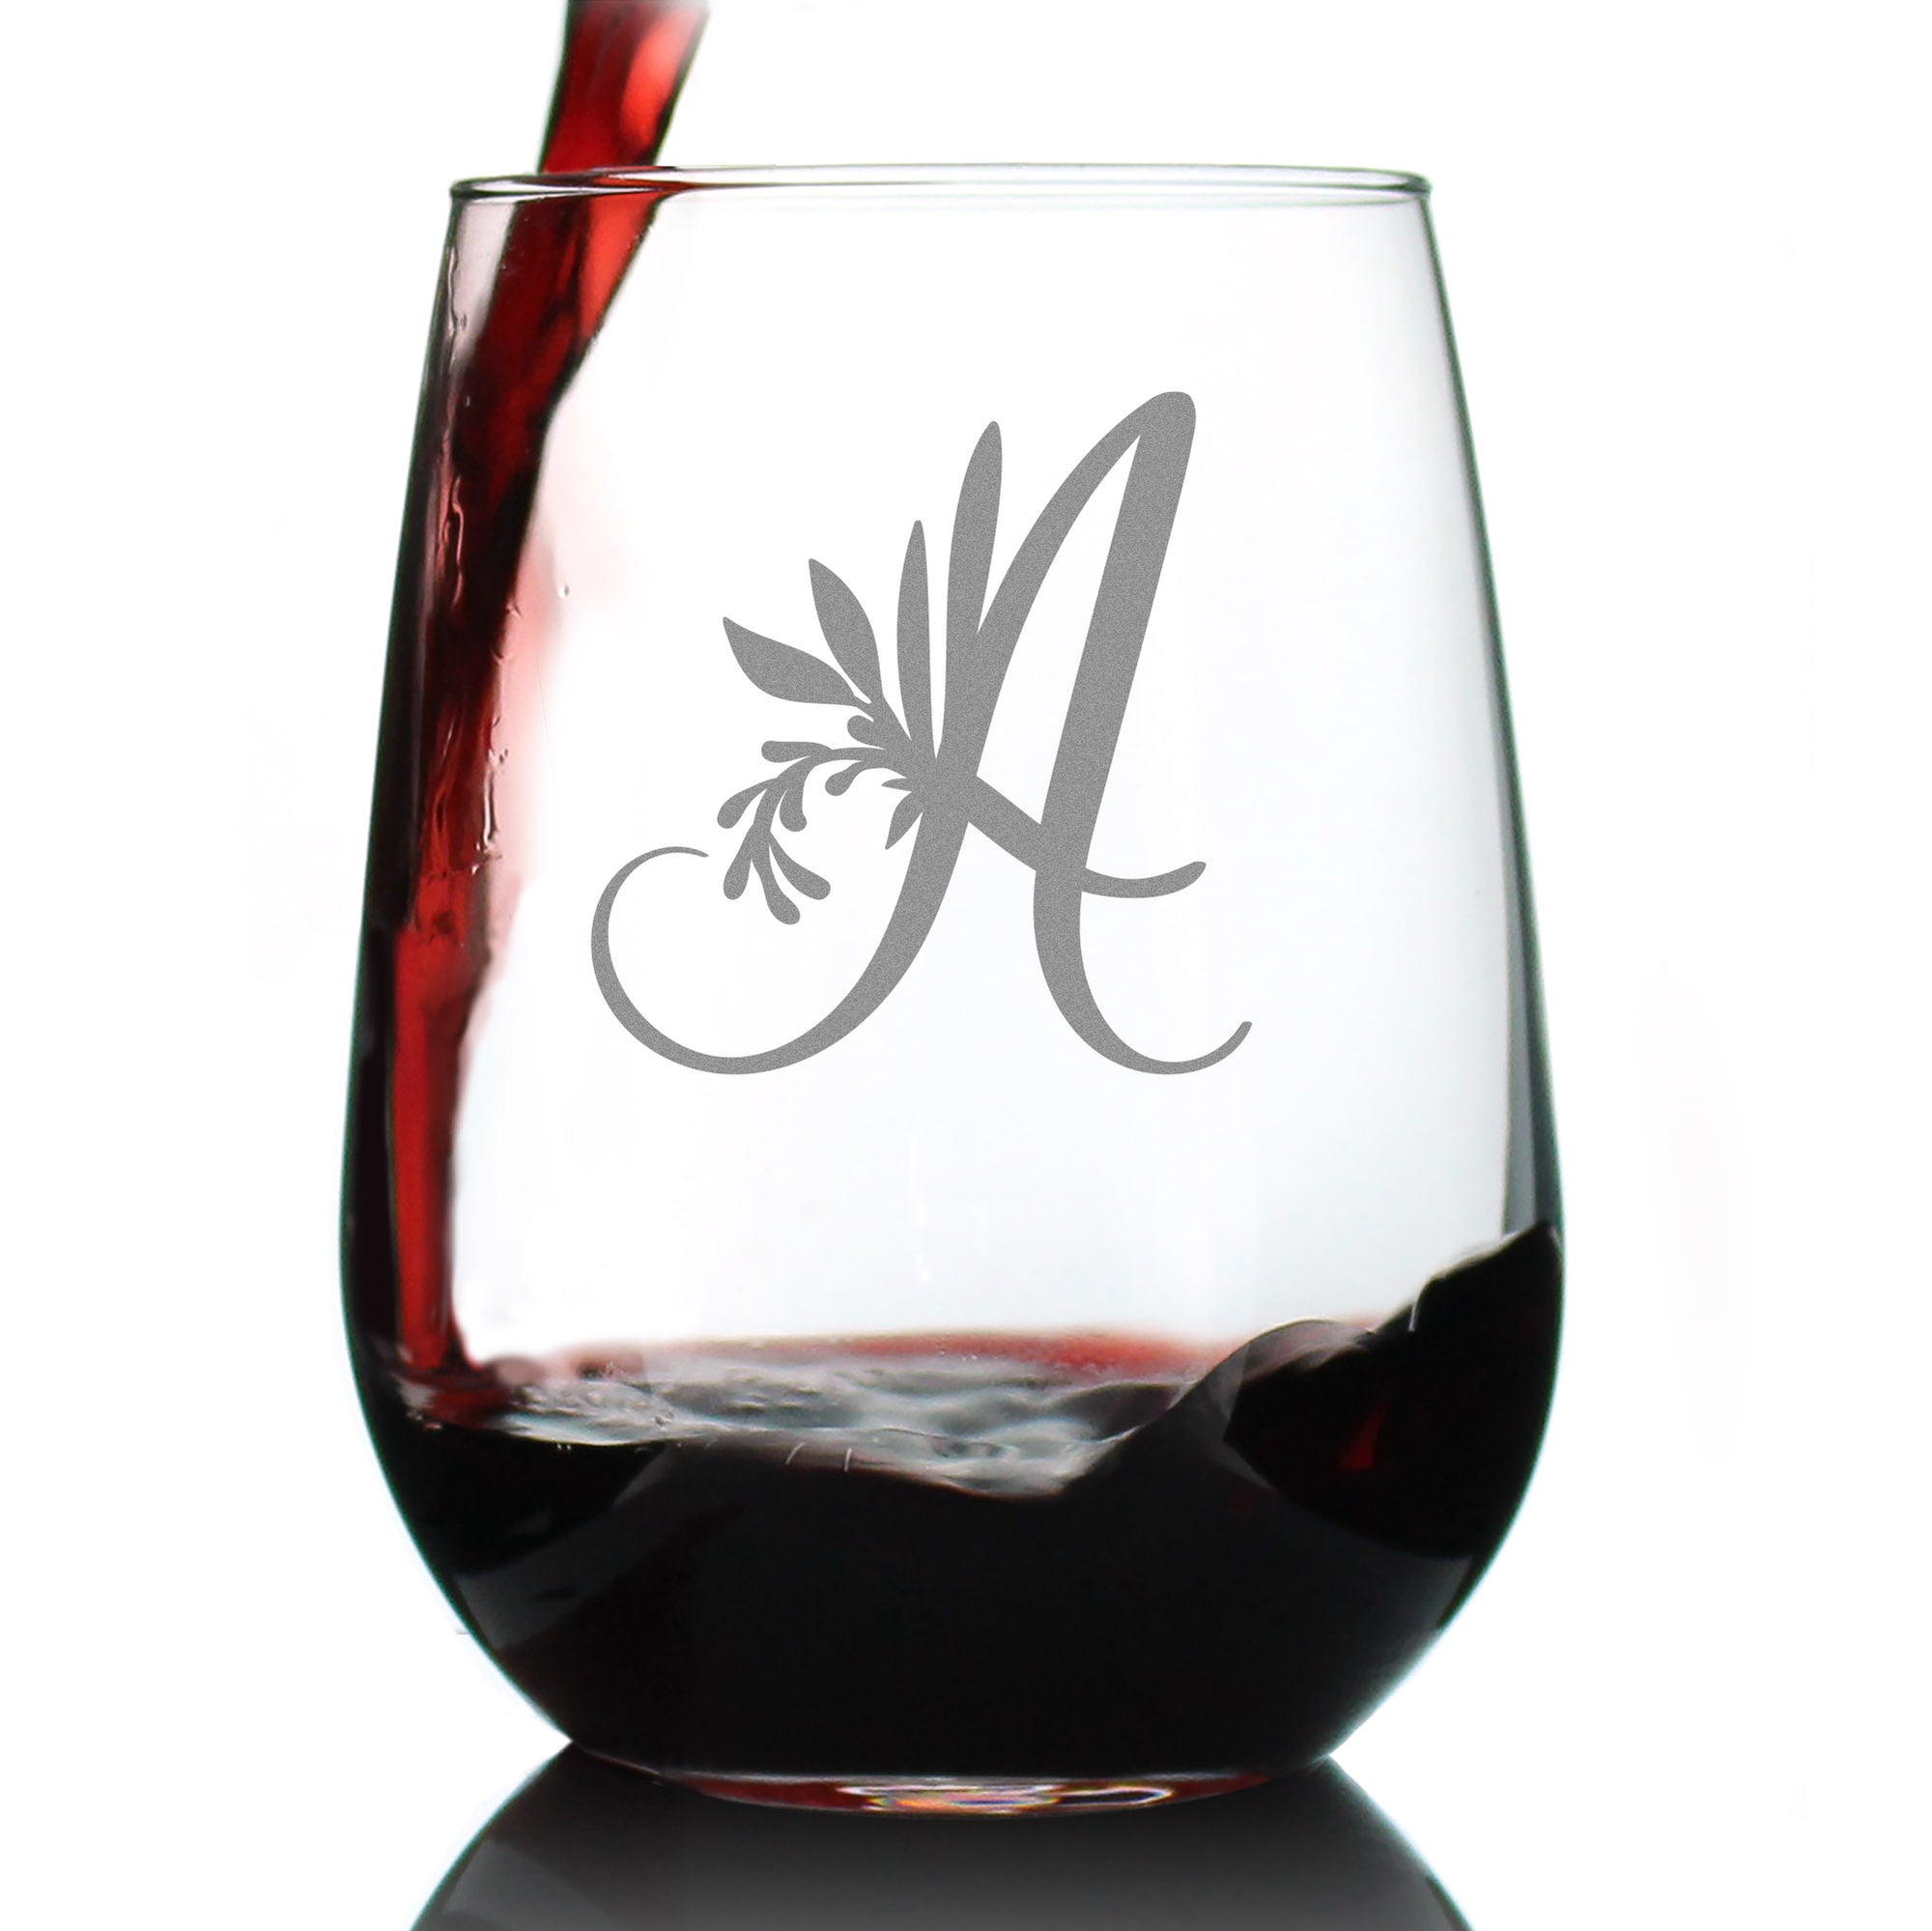 on The Rox Drinks Monogrammed Gifts for Women and Men - Letter A-Z Initial Engraved Monogram Stemless Wine Glass - 17 oz Personalized Wine Gifts for